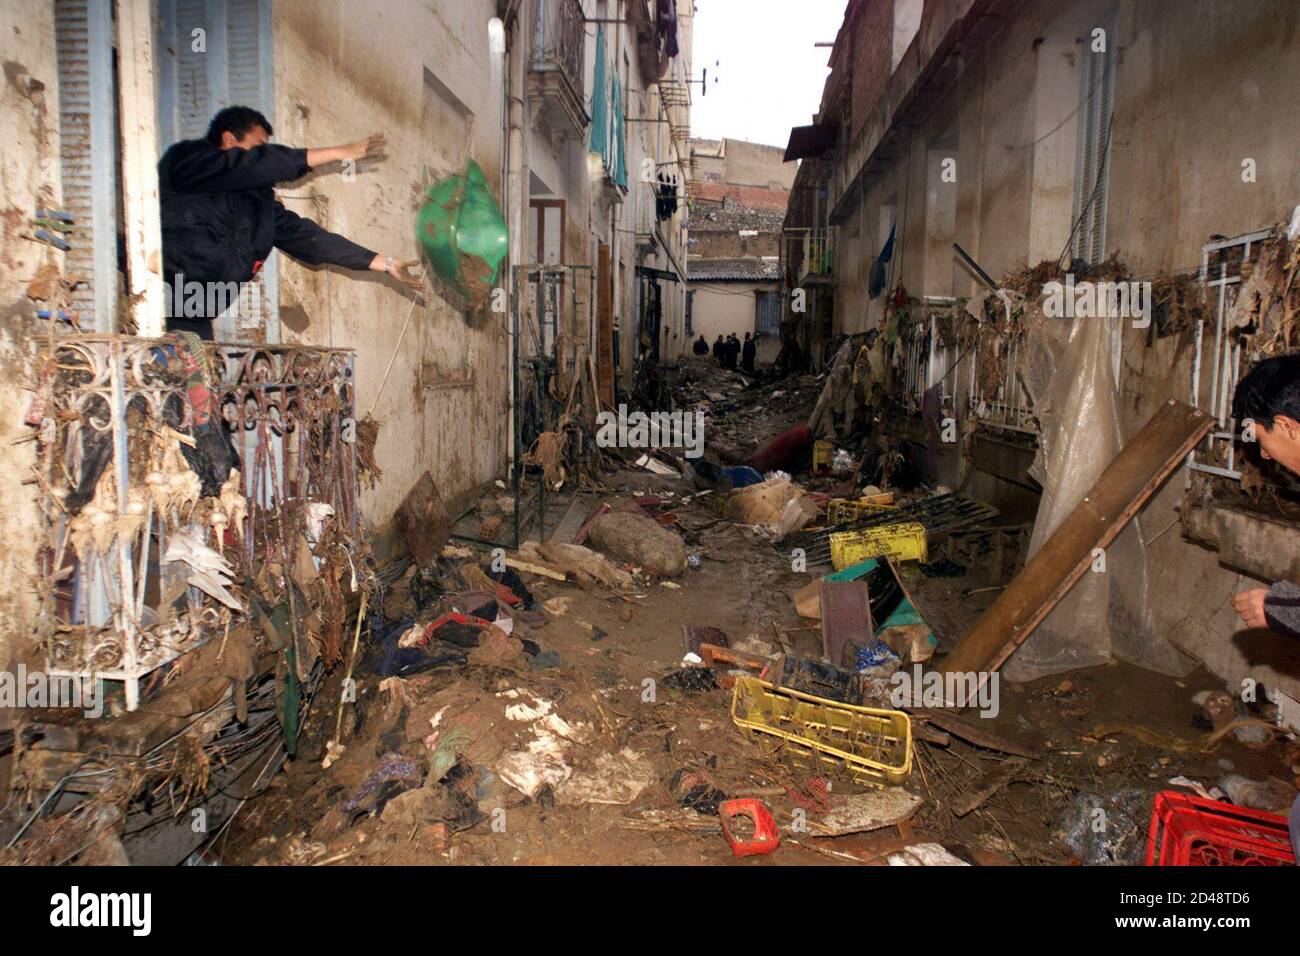 A resident of the popular Bab el Oued neighbourhood in Algiers cleans his  house in a devastated street November 13, 2001. Algeria's worst floods in  nearly 40 years have killed at least